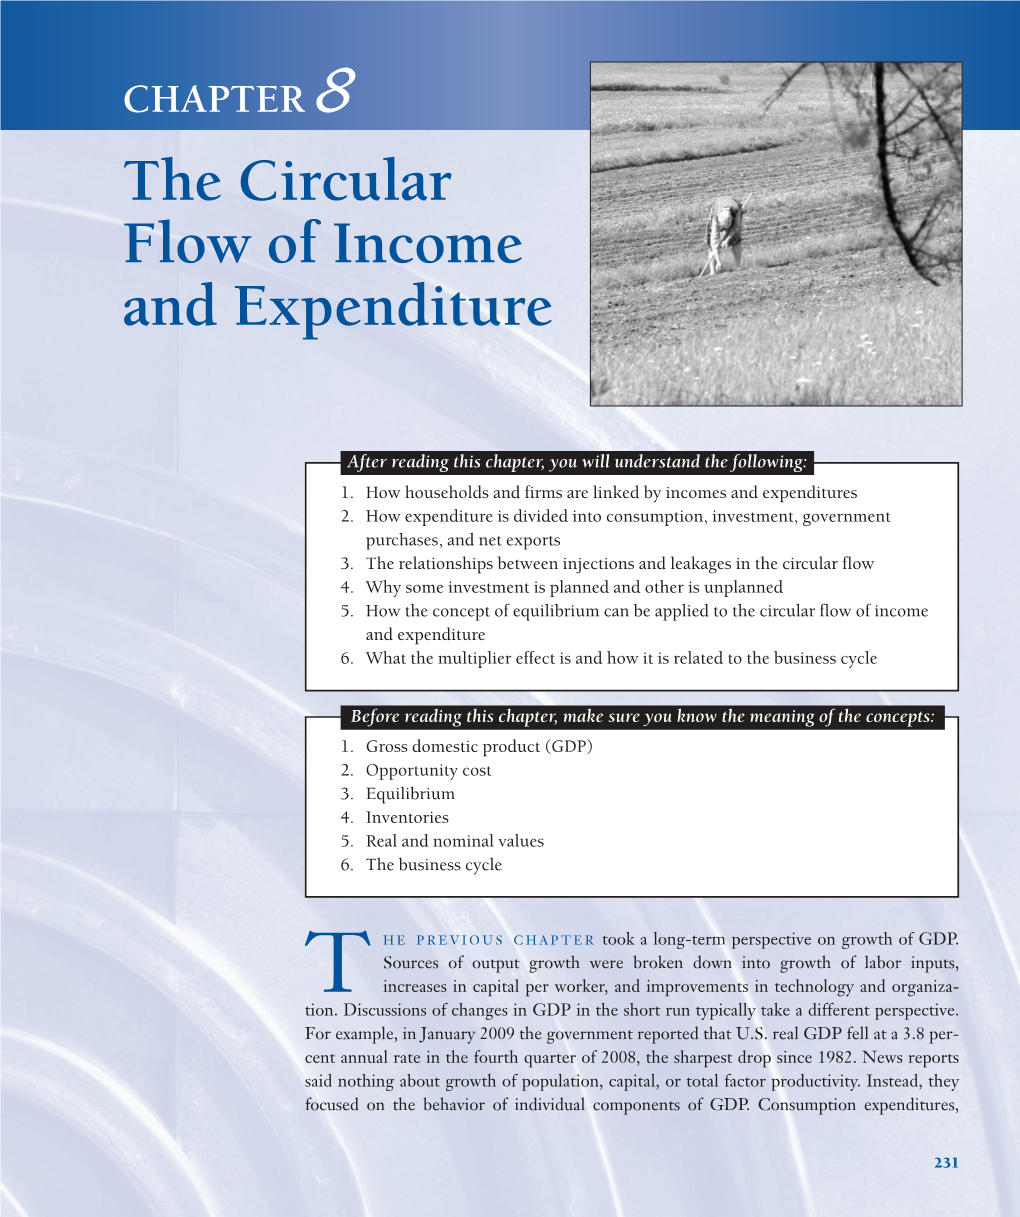 CHAPTER 8 the Circular Flow of Income and Expenditure